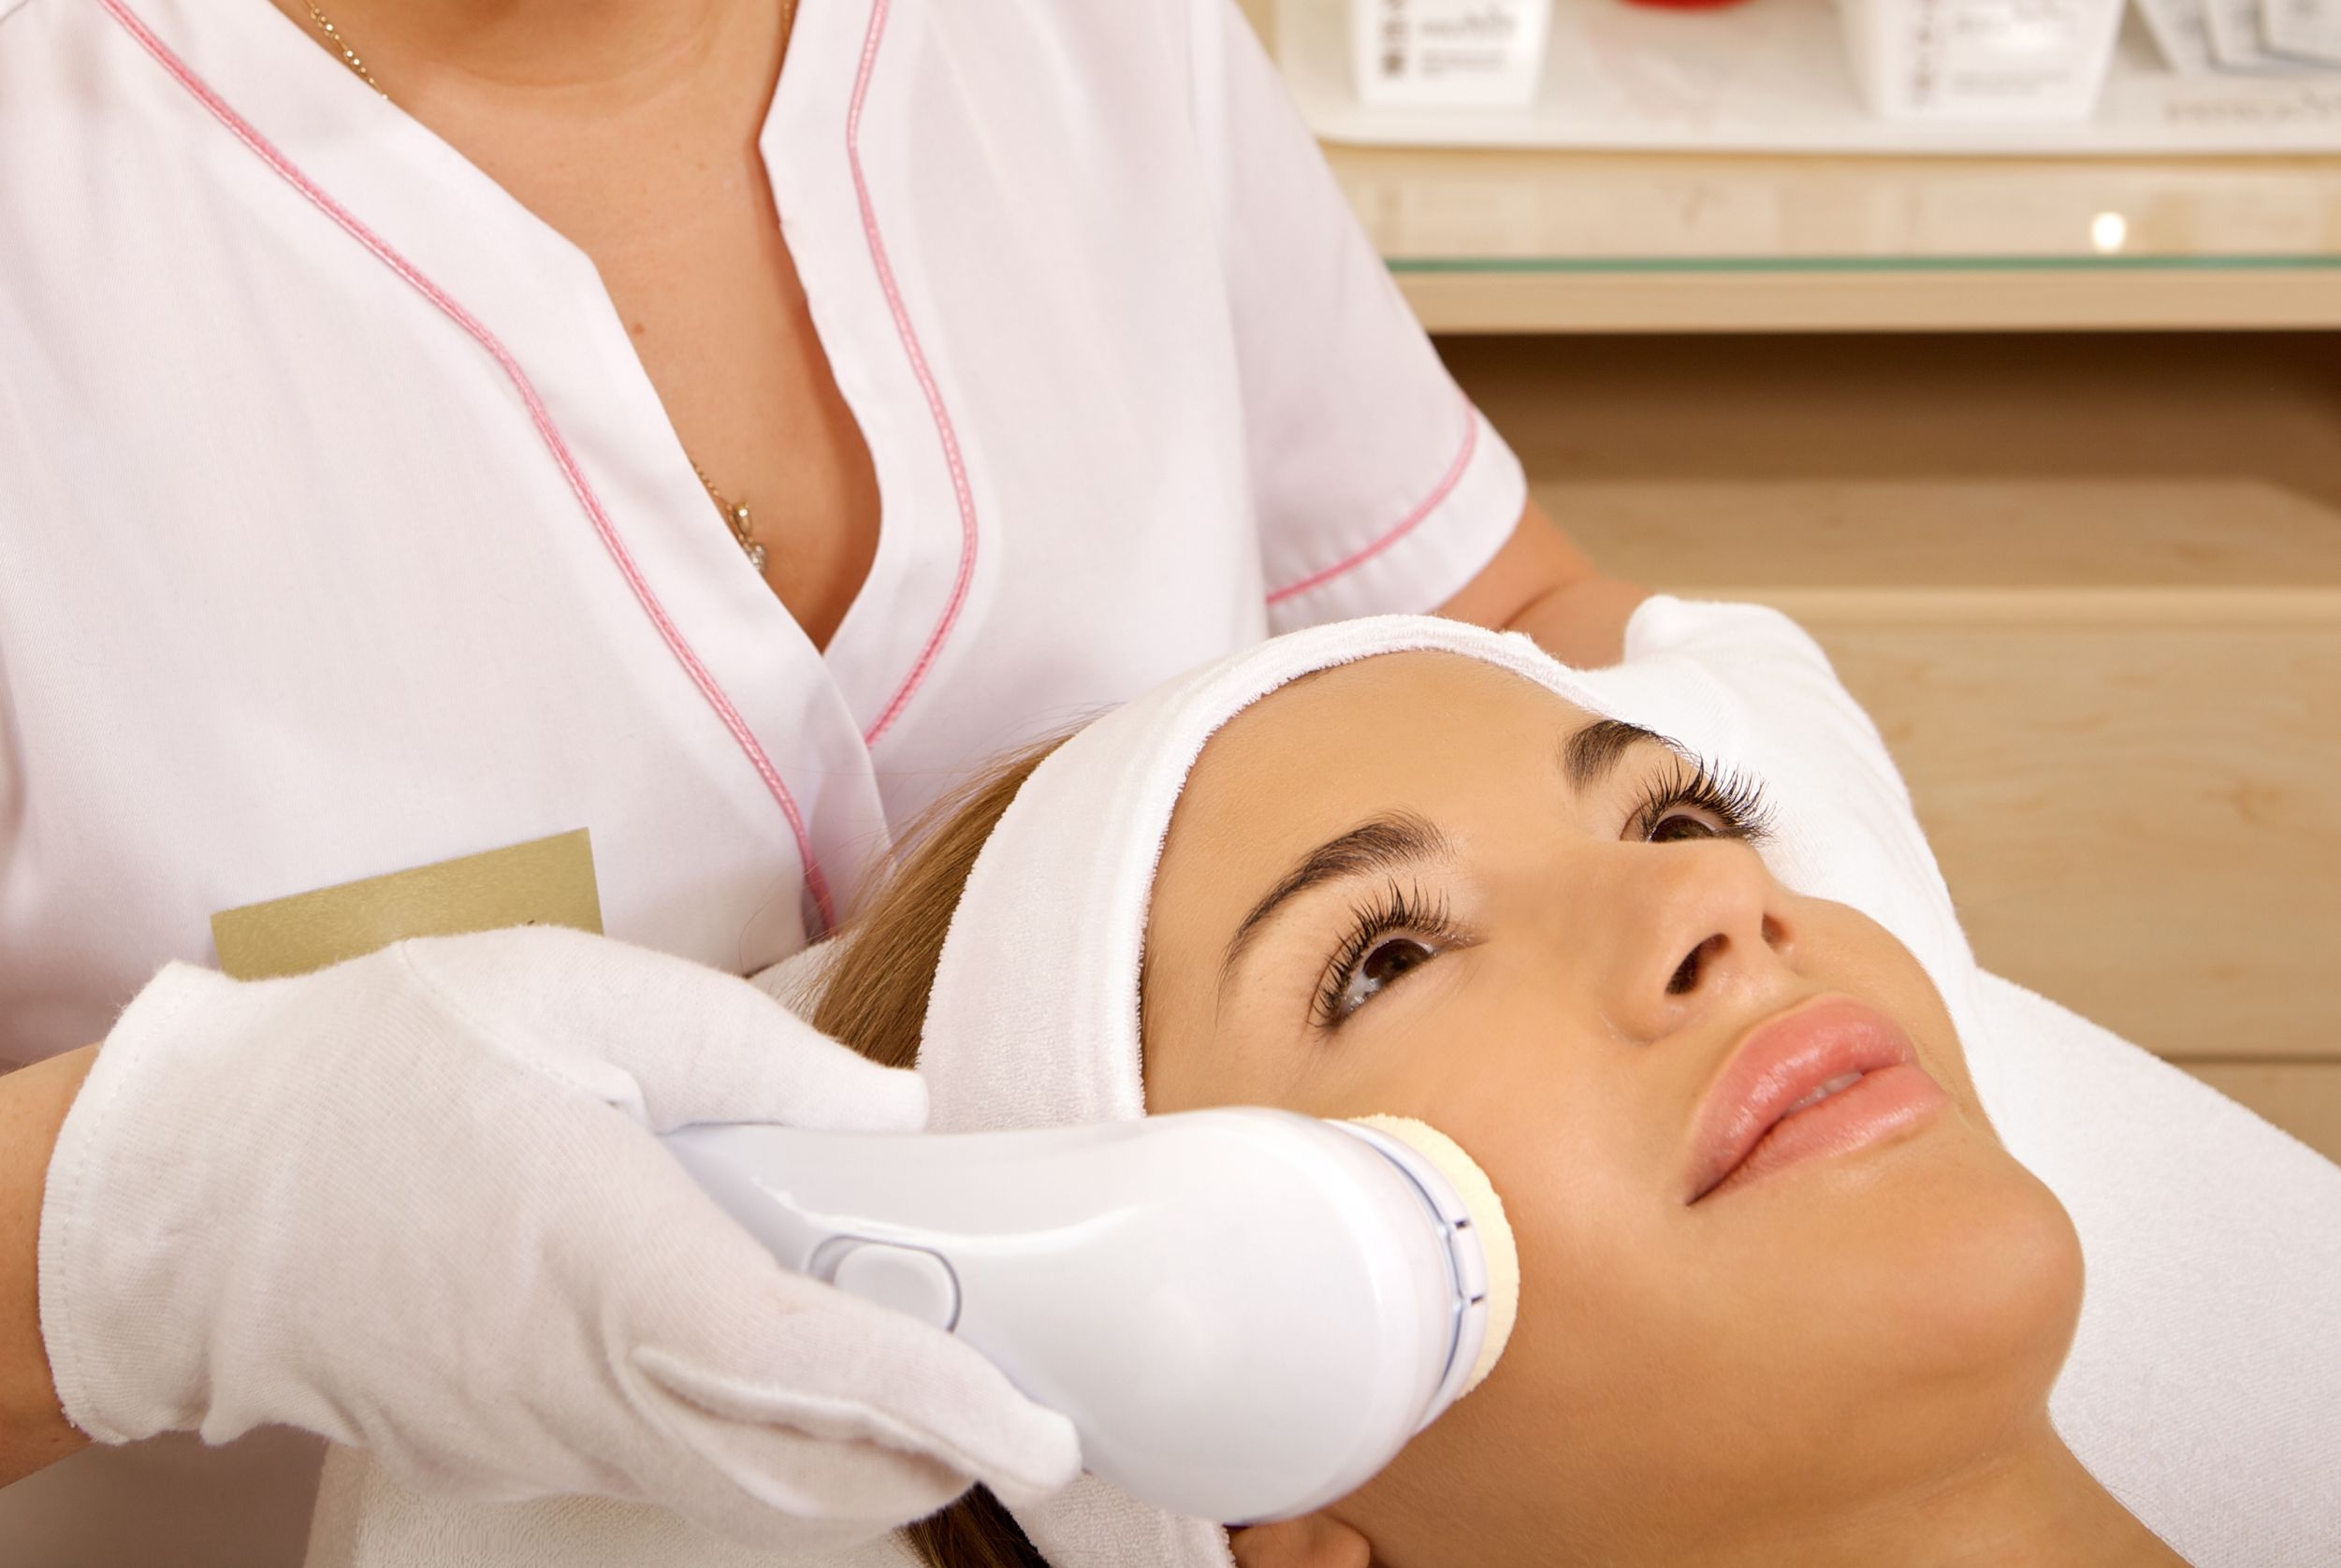 If You Are Seeking A Cosmetic Botox in Princeton, New Jersey